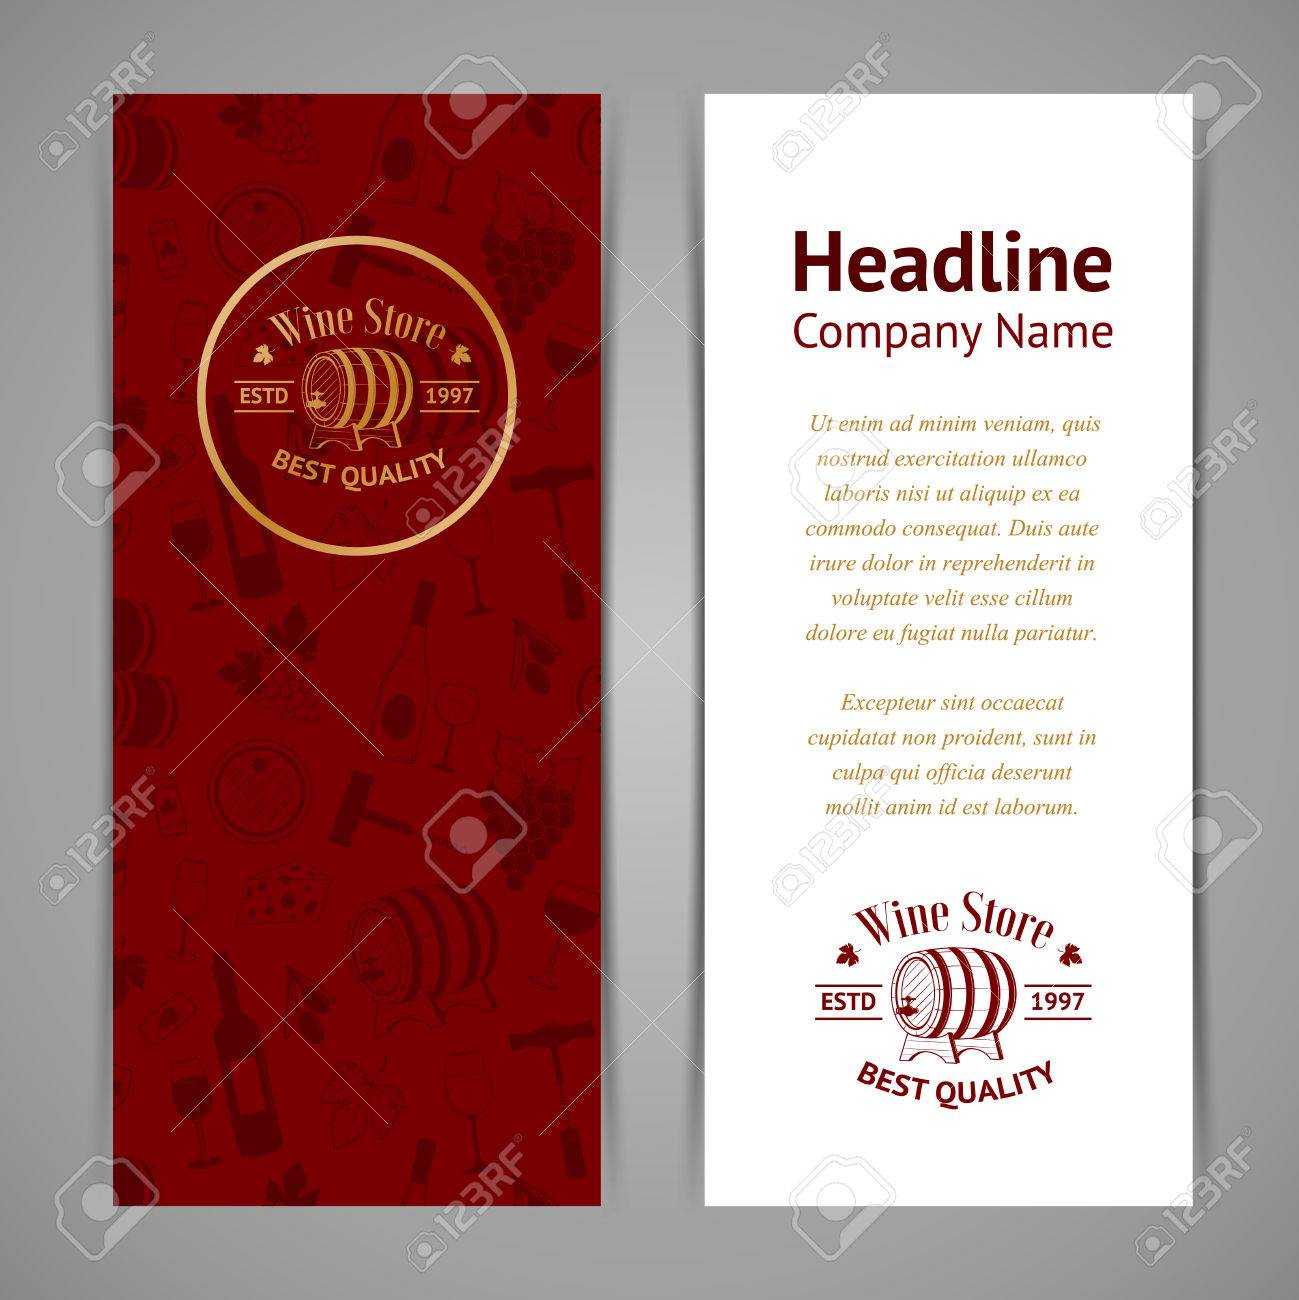 Set Of Business Cards. Templates For Wine Company Throughout Company Business Cards Templates